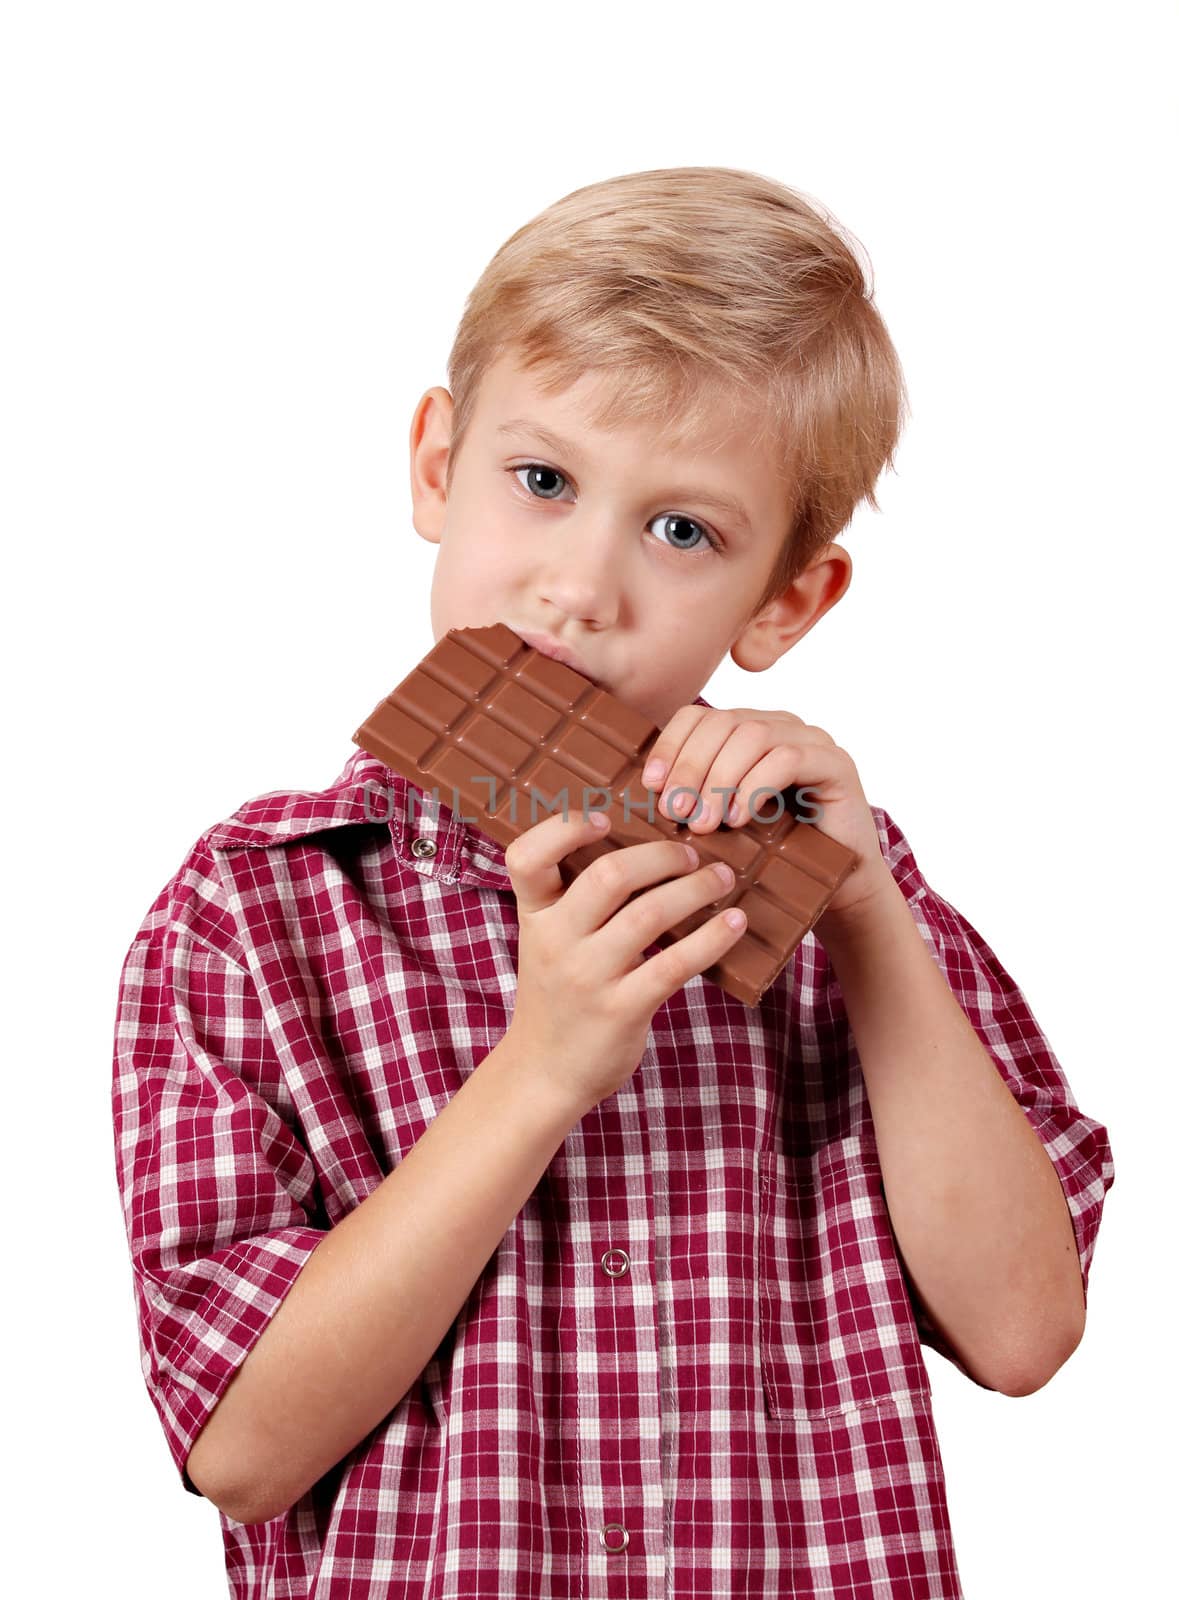 boy eat chocolate on white by goce